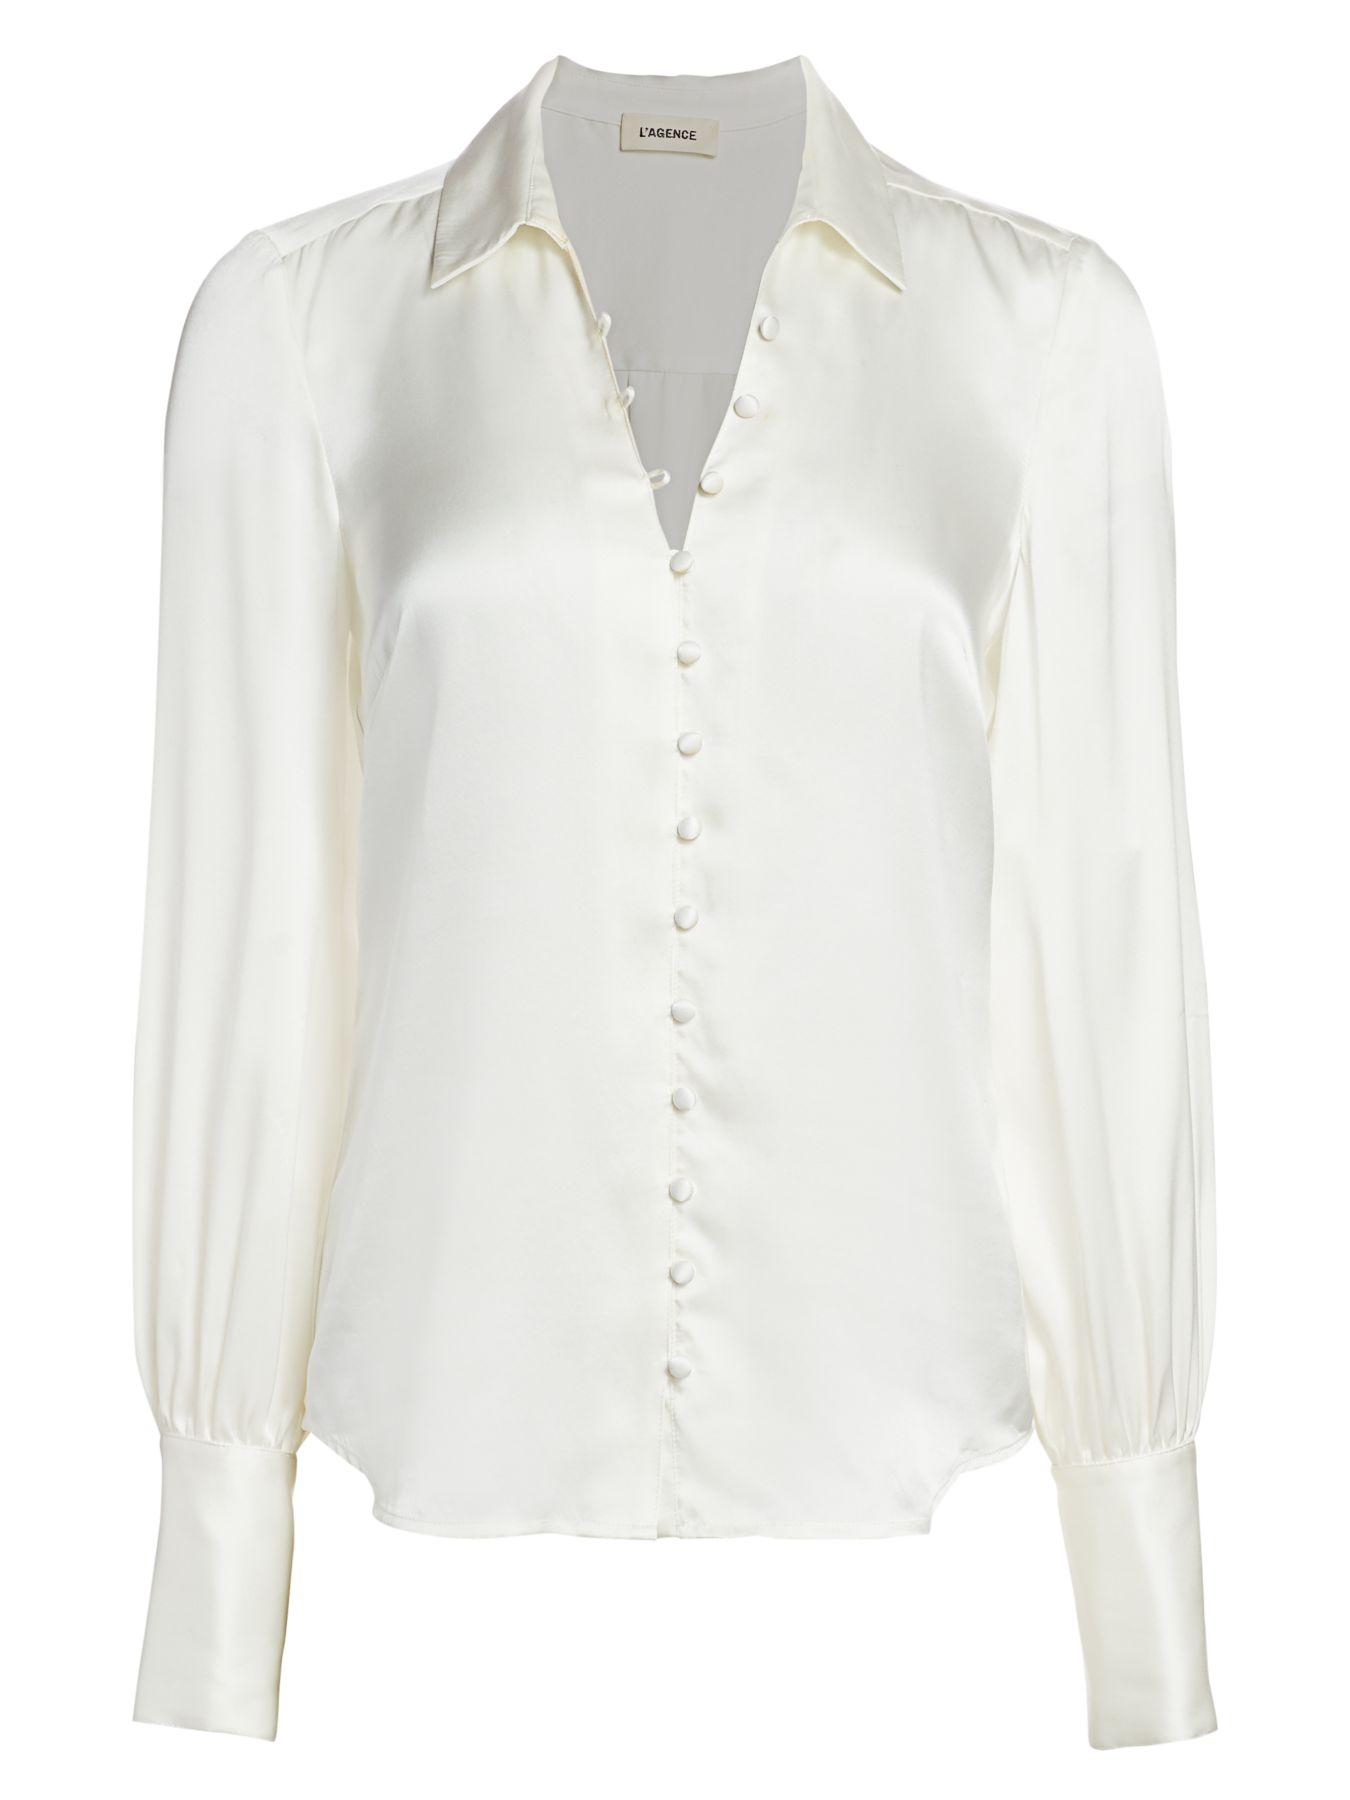 L'Agence Naomi Silk Charmeuse Blouse in Ivory (White) - Lyst